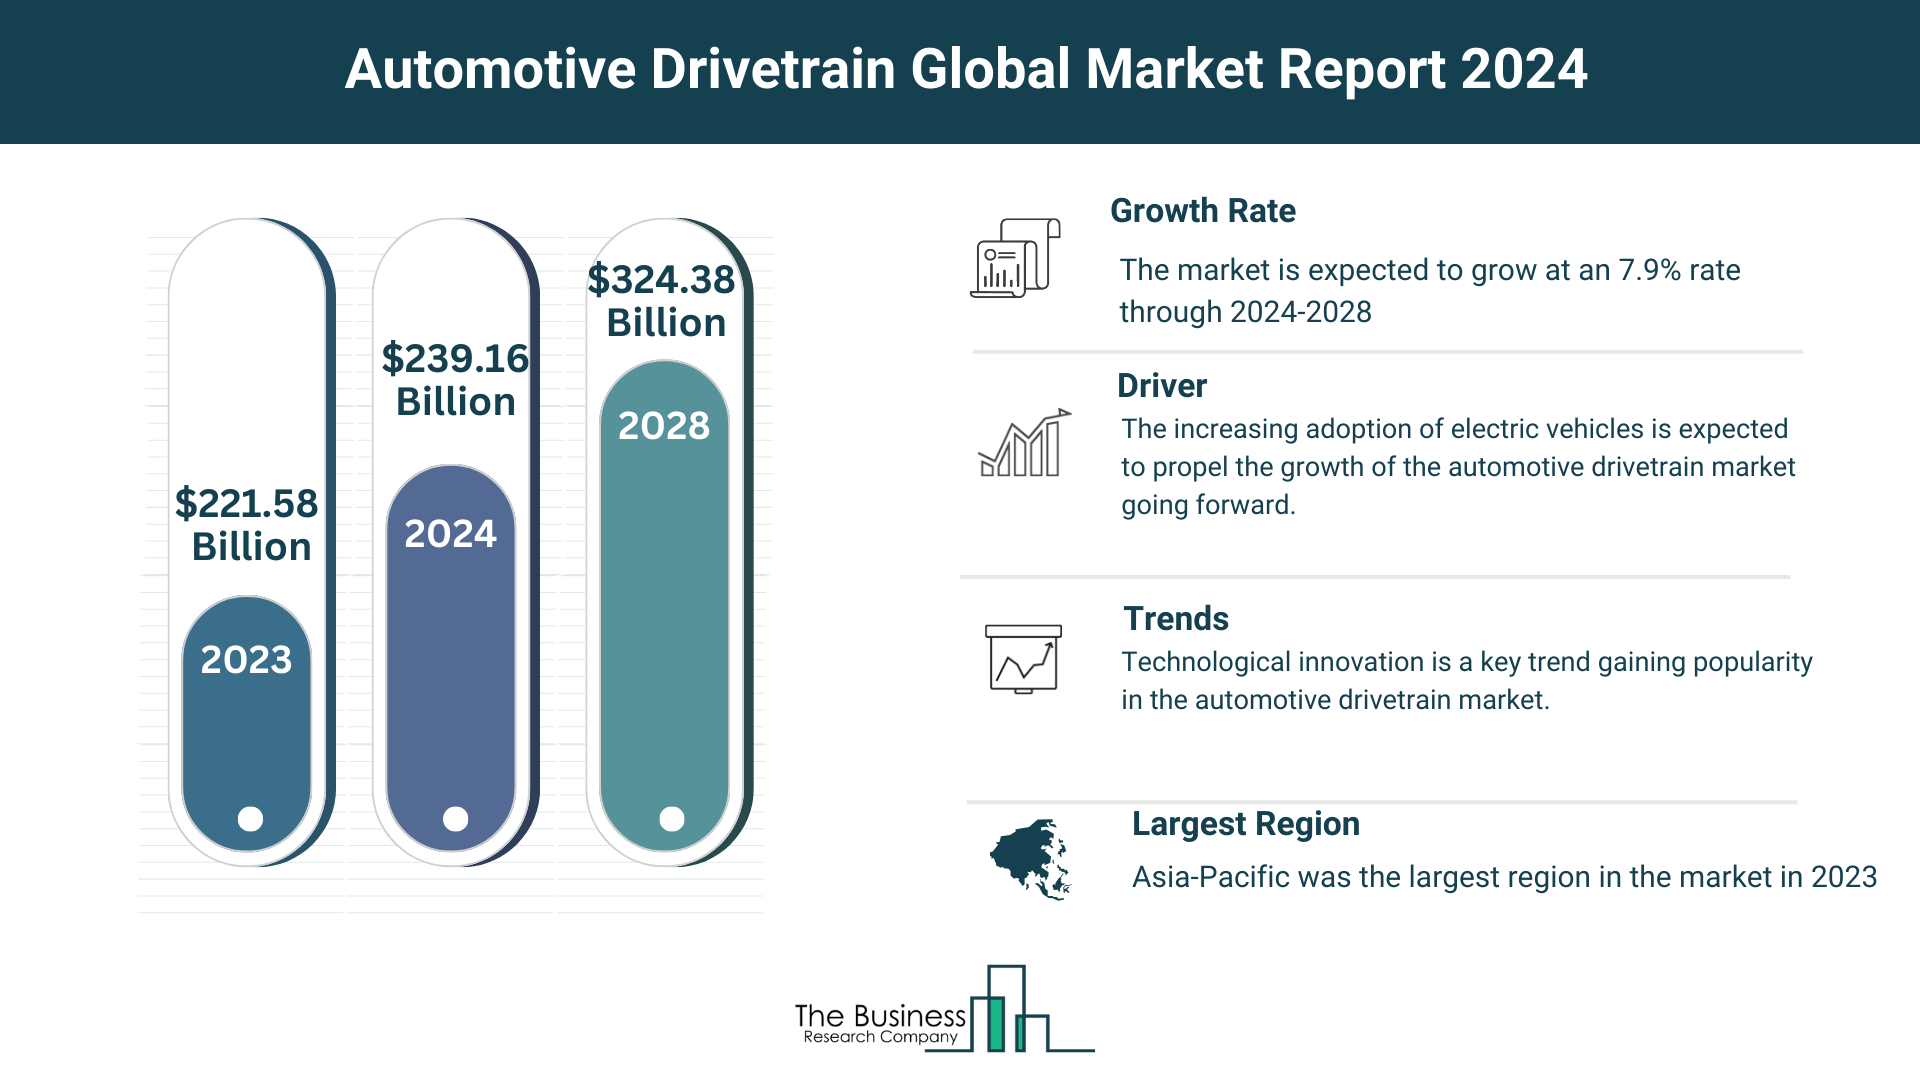 What Are The 5 Top Insights From The Automotive Drivetrain Market Forecast 2024